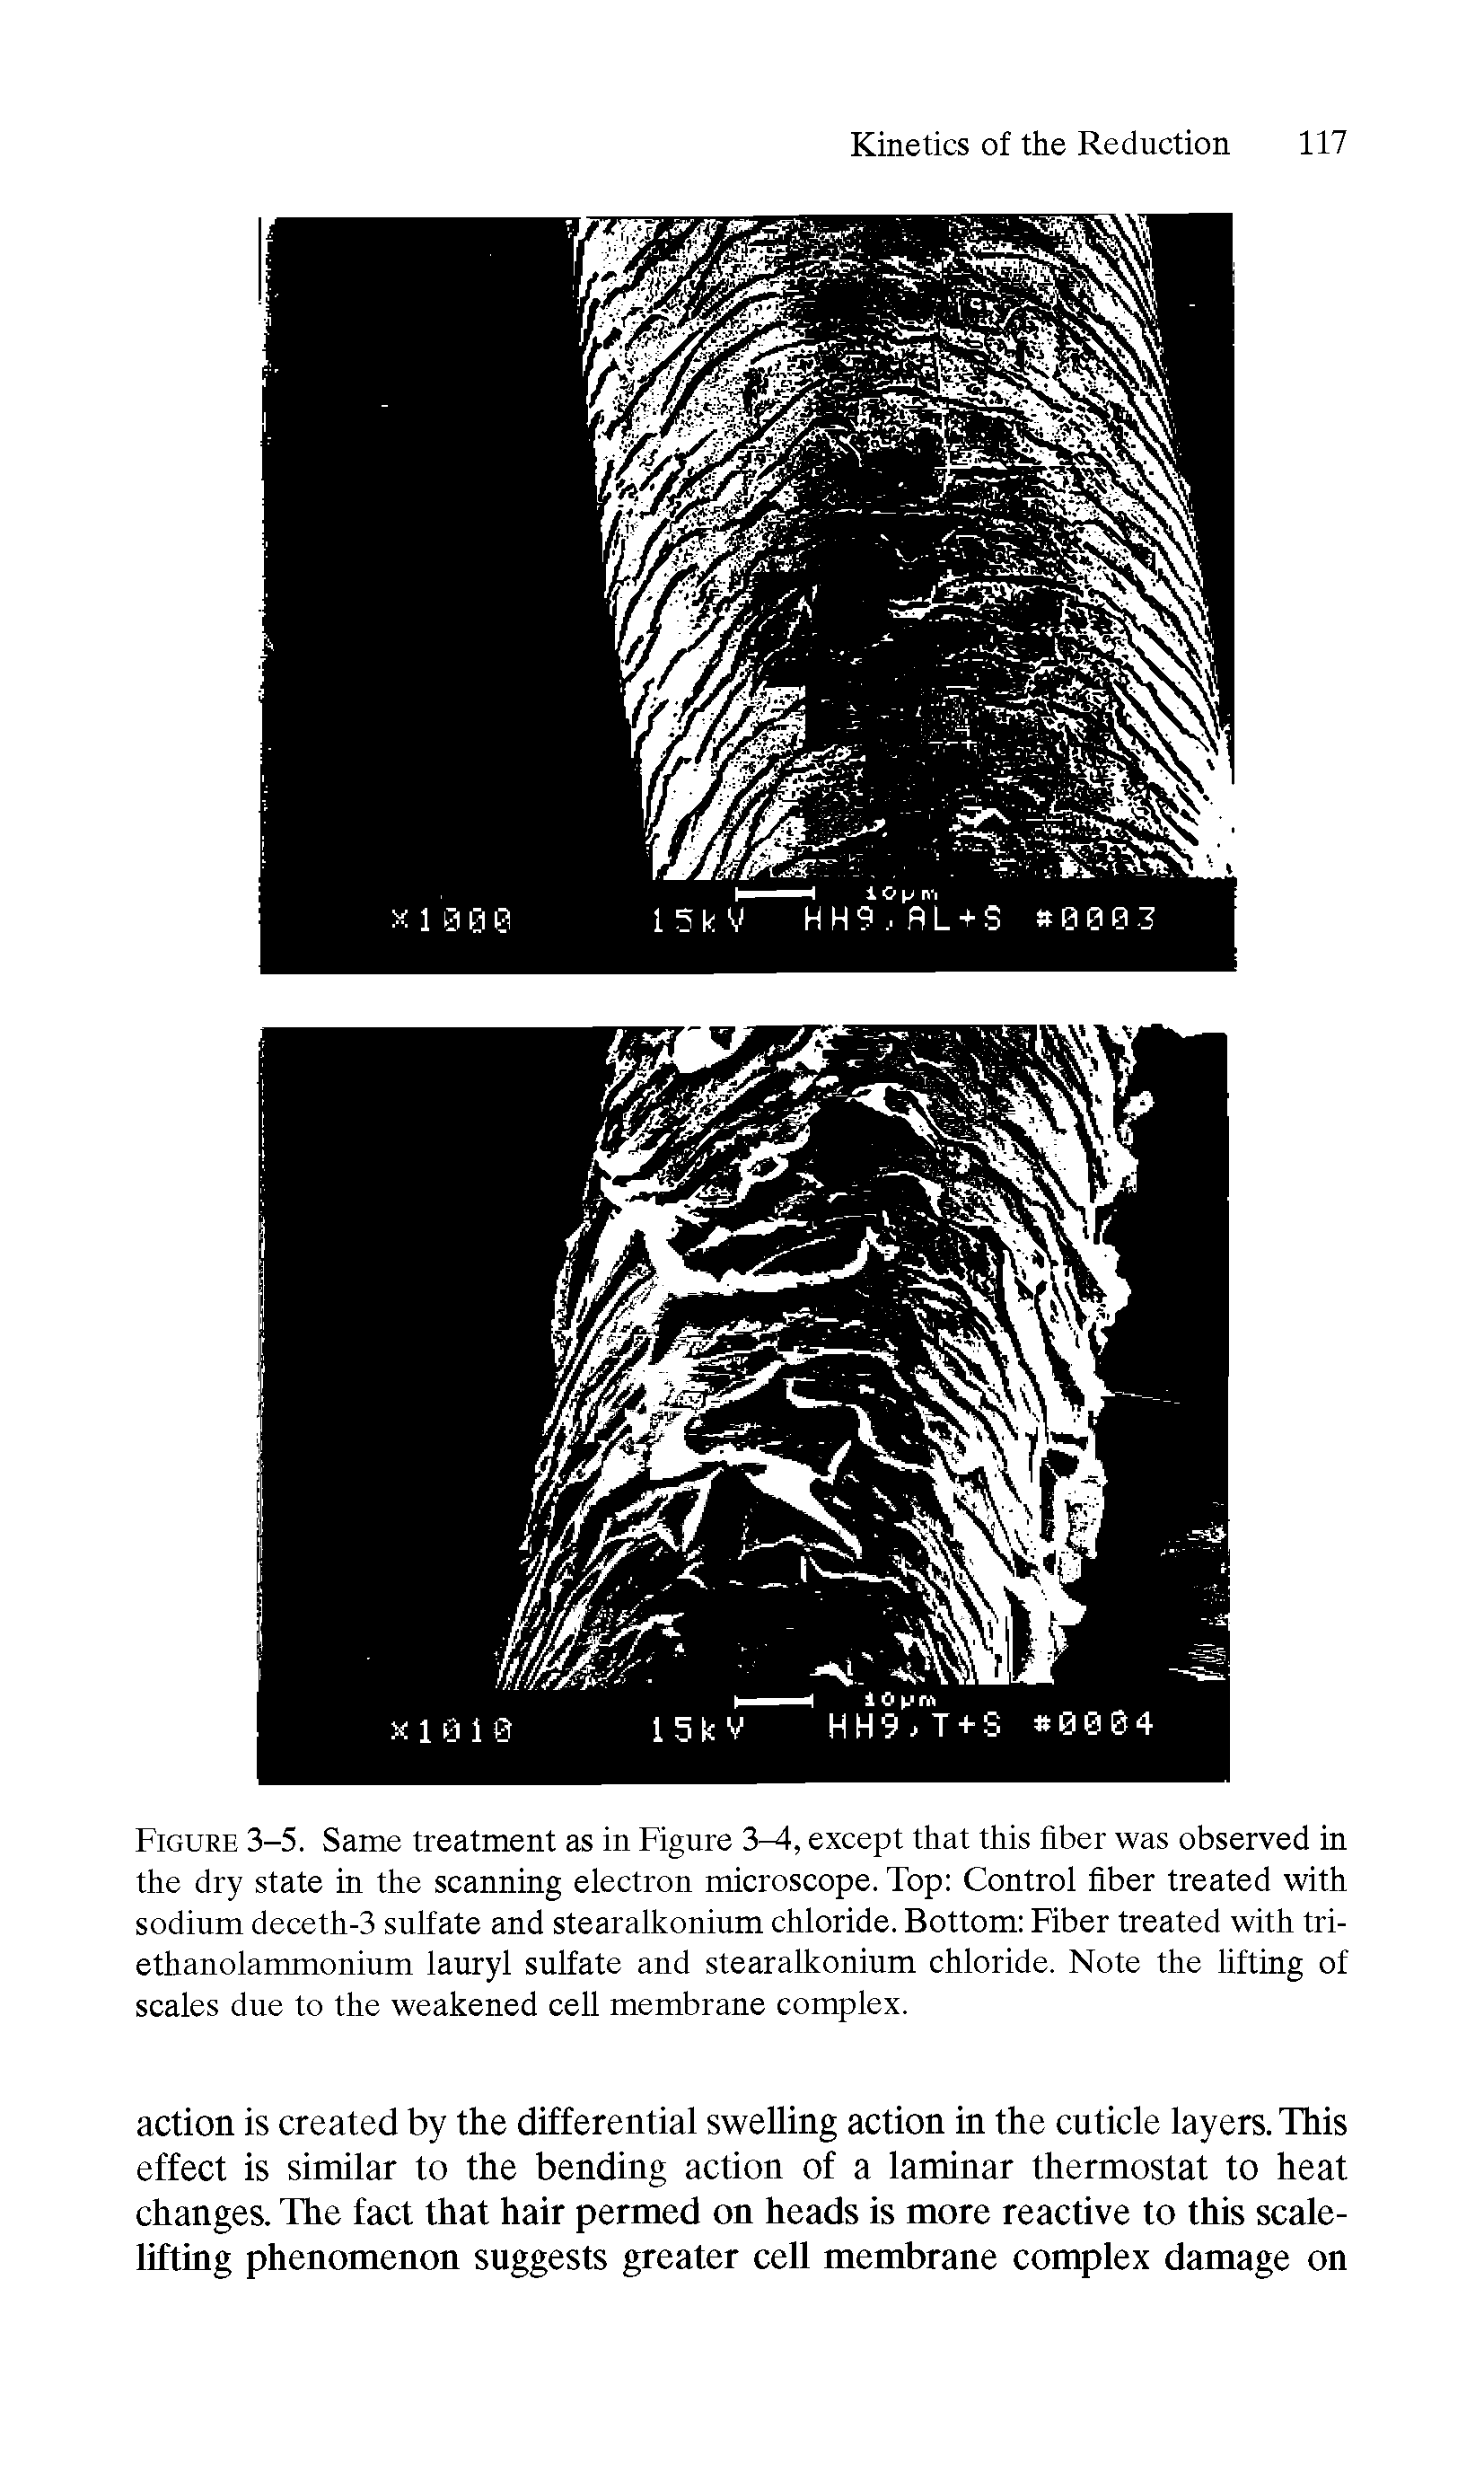 Figure 3-5. Same treatment as in Figure 3, except that this fiber was observed in the dry state in the scanning electron microscope. Top Control fiber treated with sodium deceth-3 sulfate and stearalkonium chloride. Bottom Fiber treated with tri-ethanolammonium lauryl sulfate and stearalkonium chloride. Note the lifting of scales due to the weakened cell membrane complex.